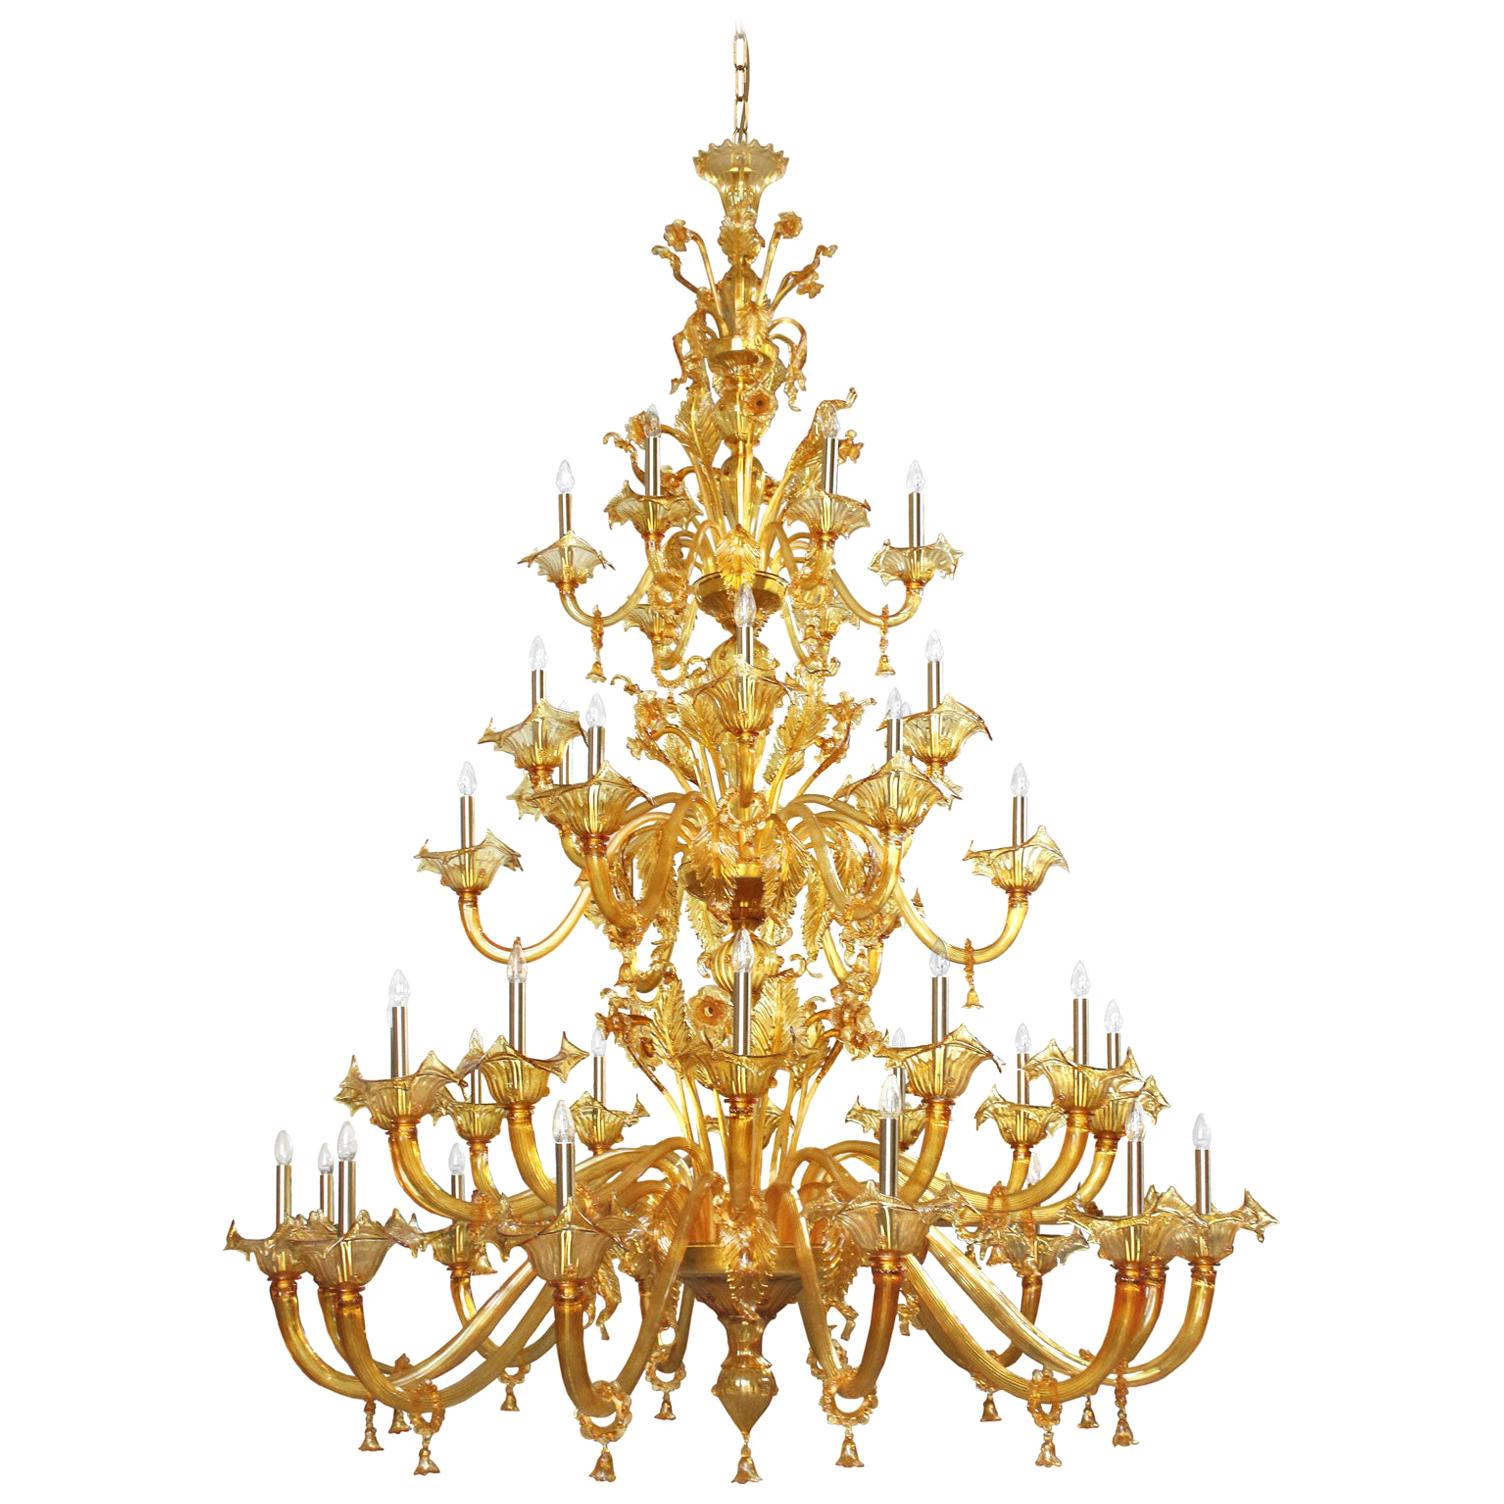 Venetian style Chandelier, 42 arms, 3 Tiers, Amber Murano Glass by Multiforme For Sale